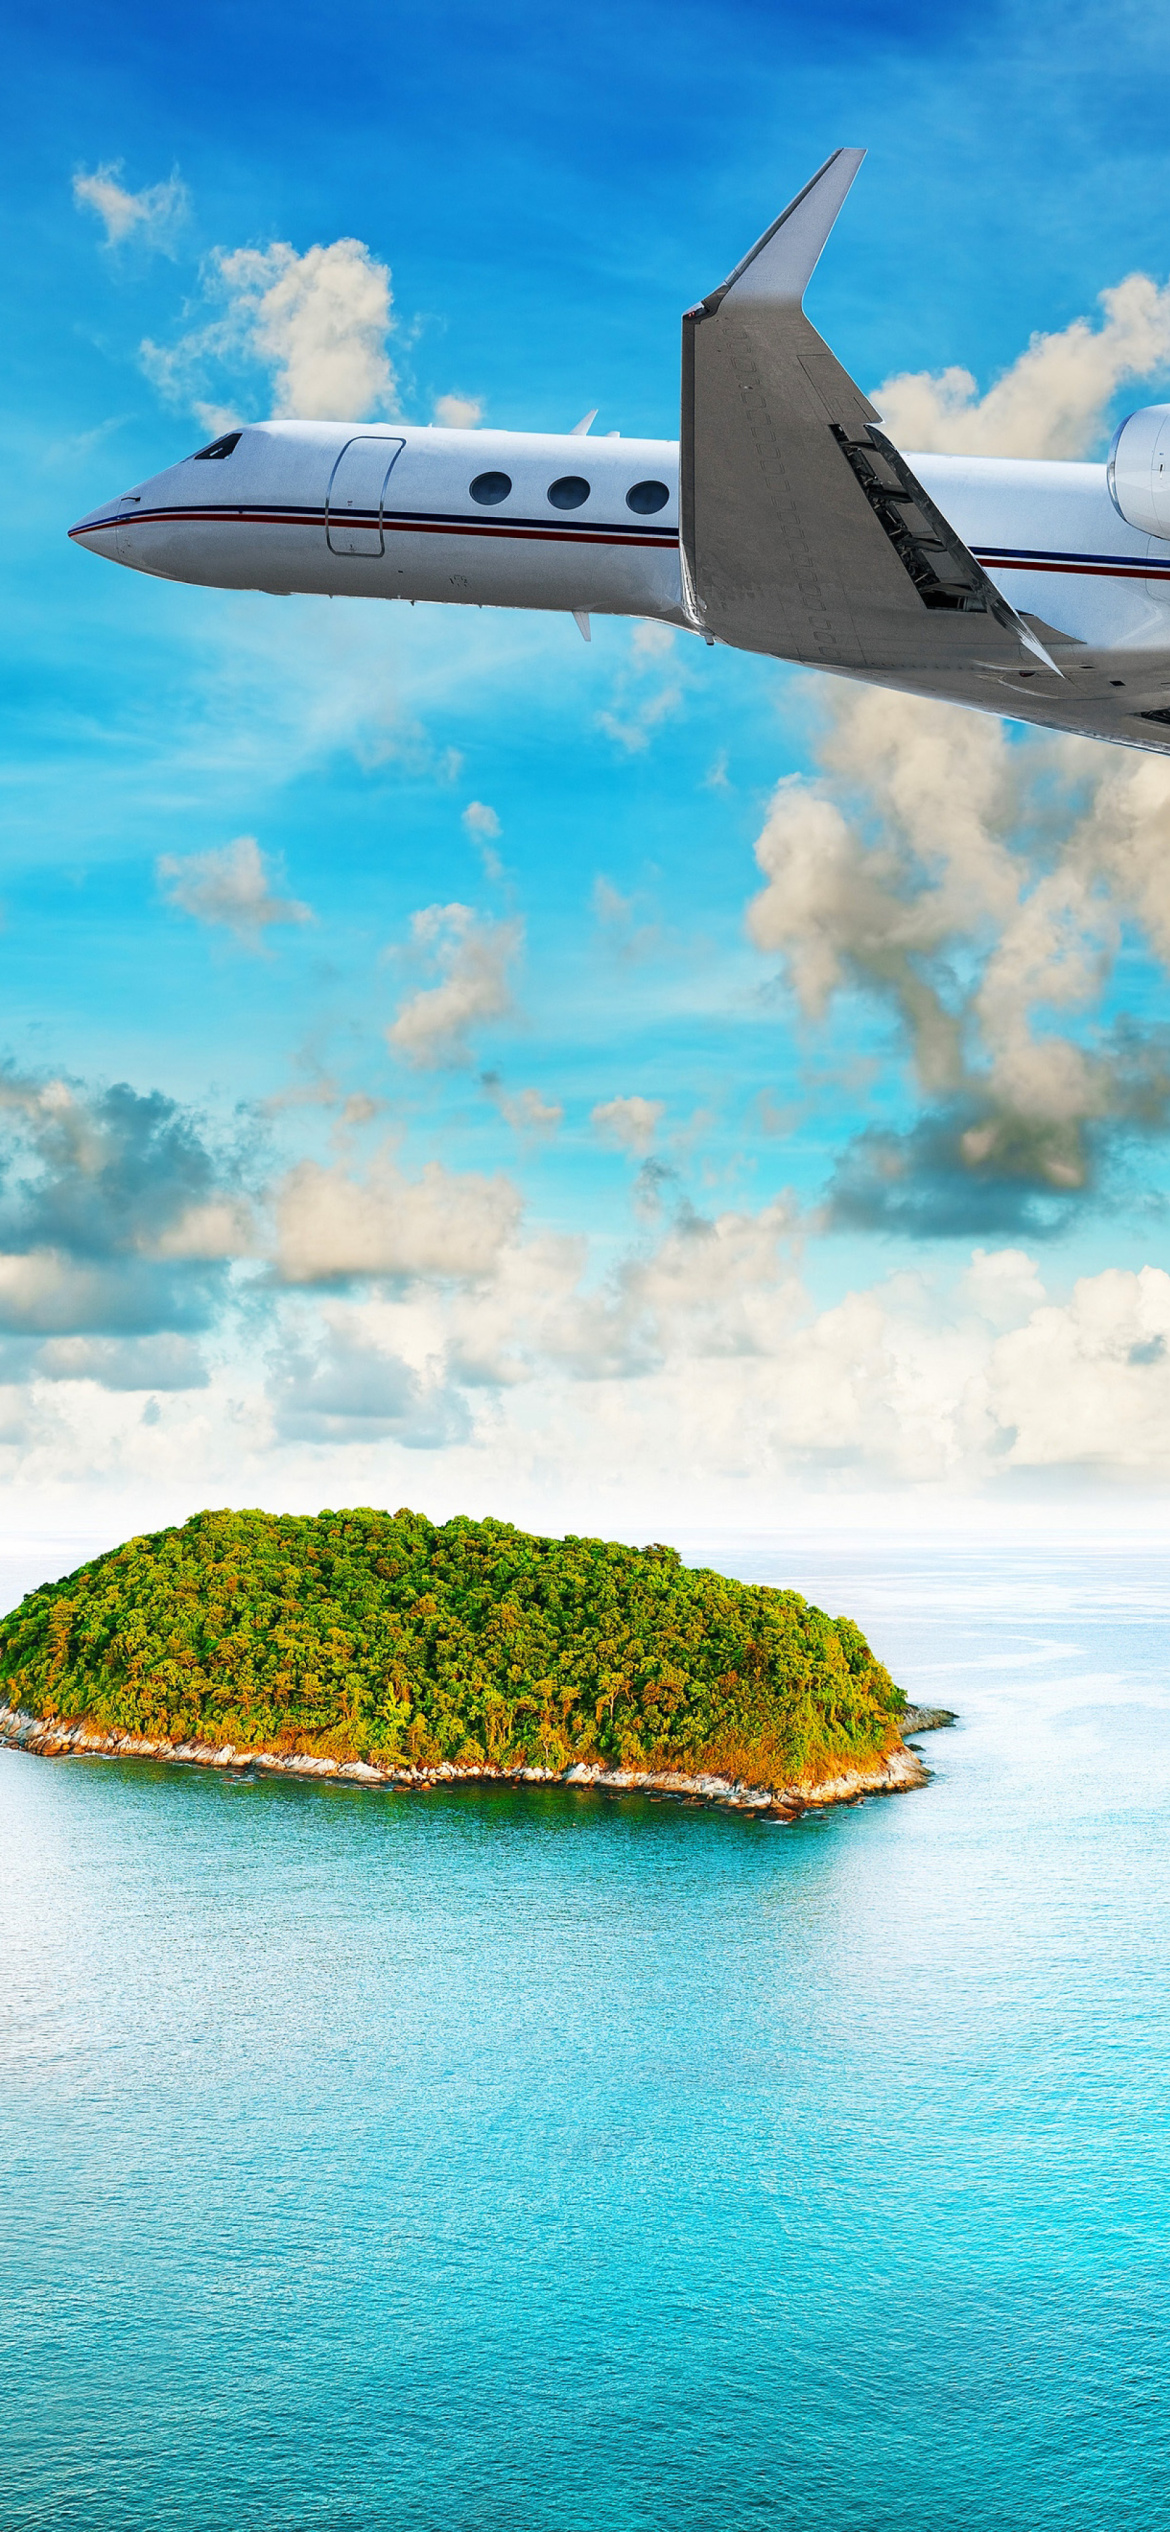 Private Island Luxury Holiday wallpaper 1170x2532